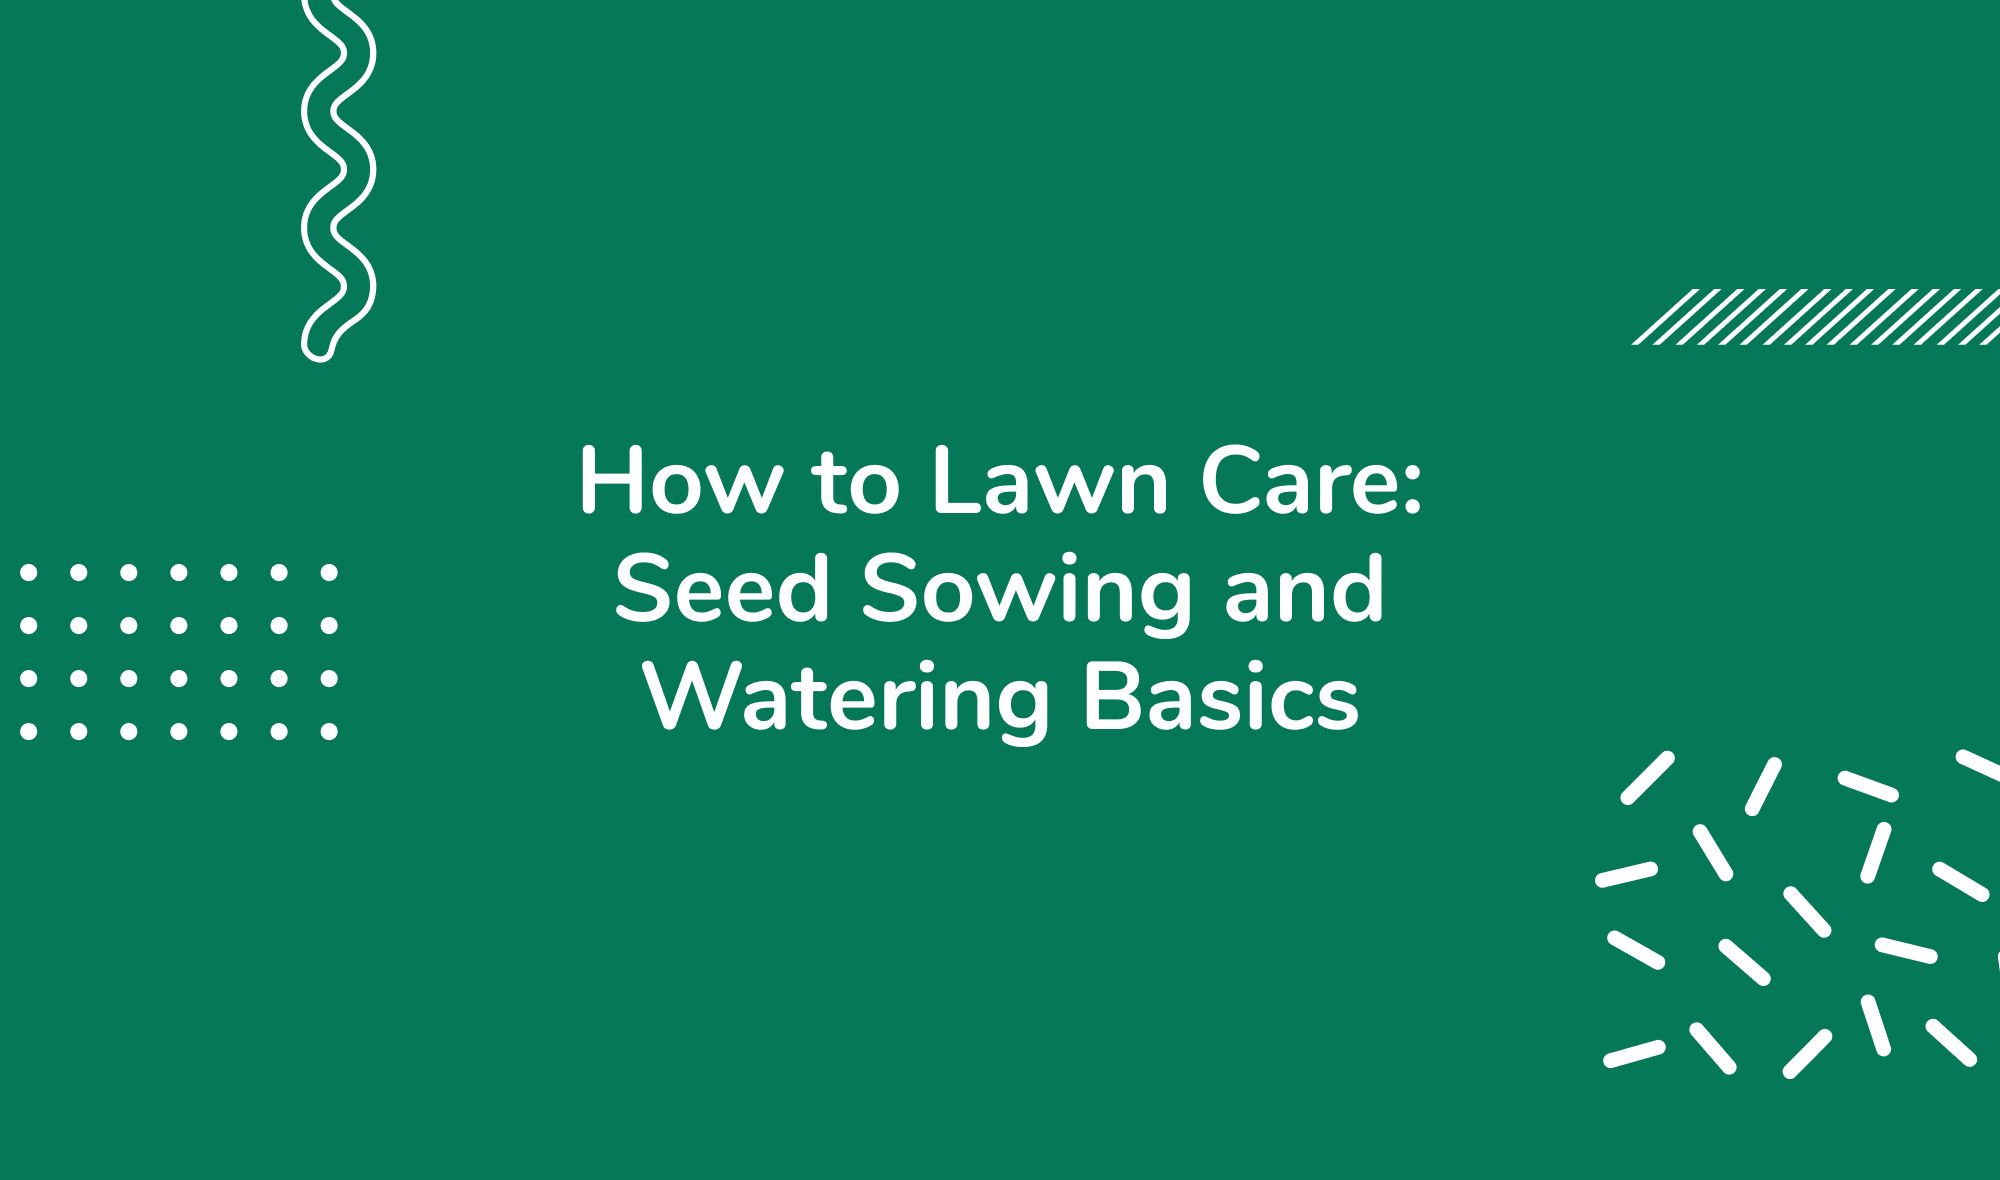 How to Lawn Care: Seed Sowing and Watering Basics